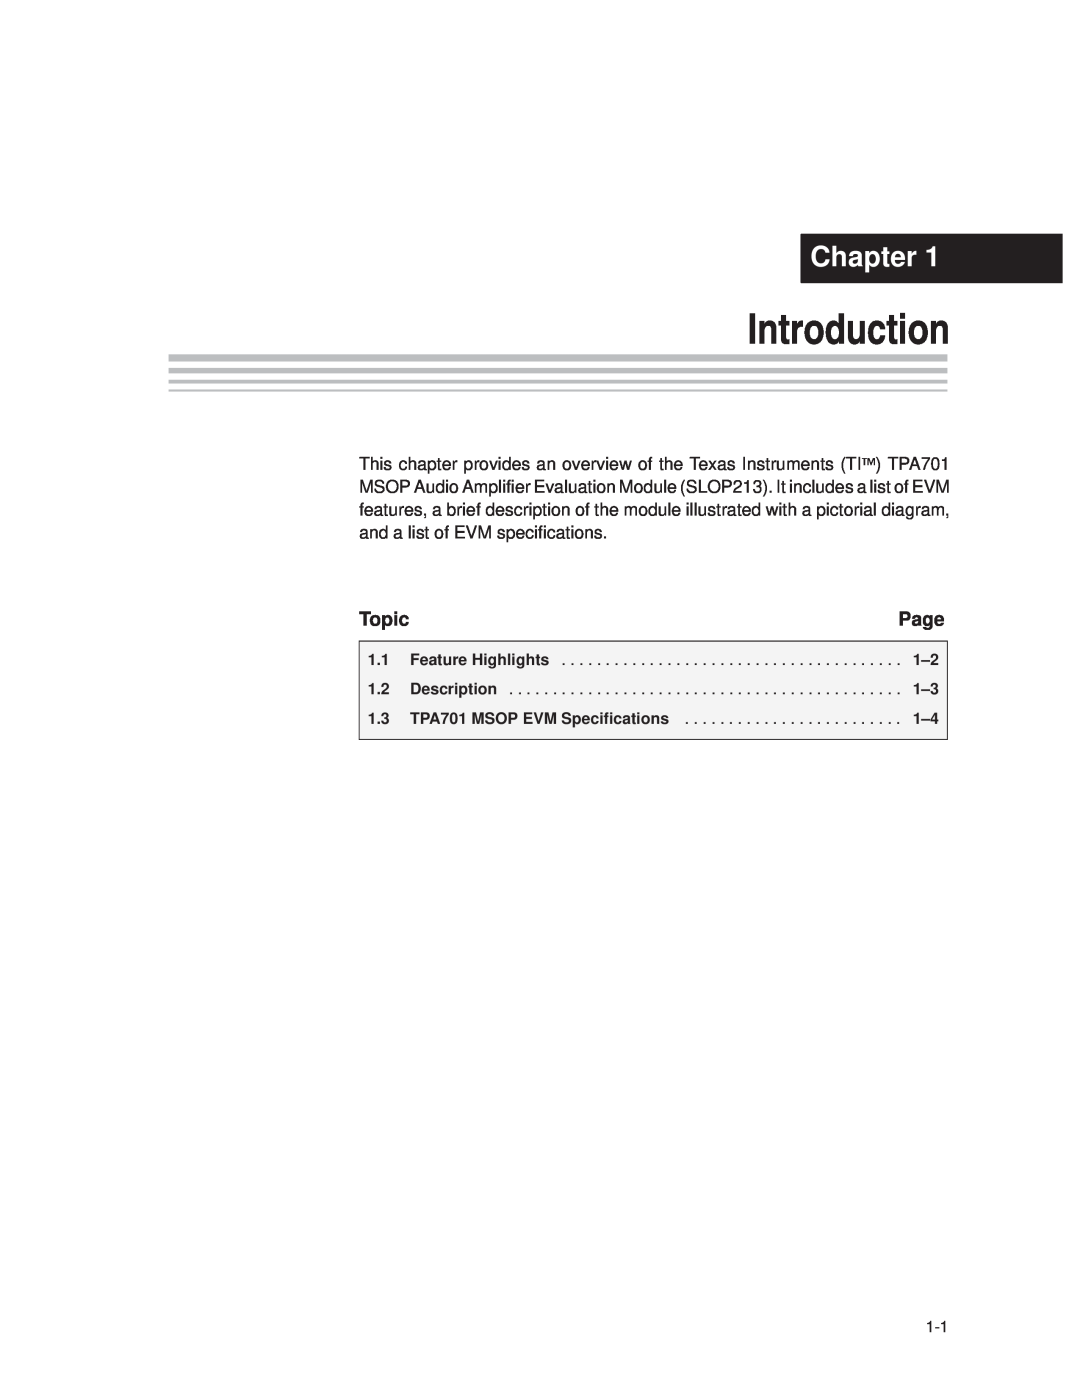 Texas Instruments TPA701 manual Introduction, Chapter, Page, Topic 